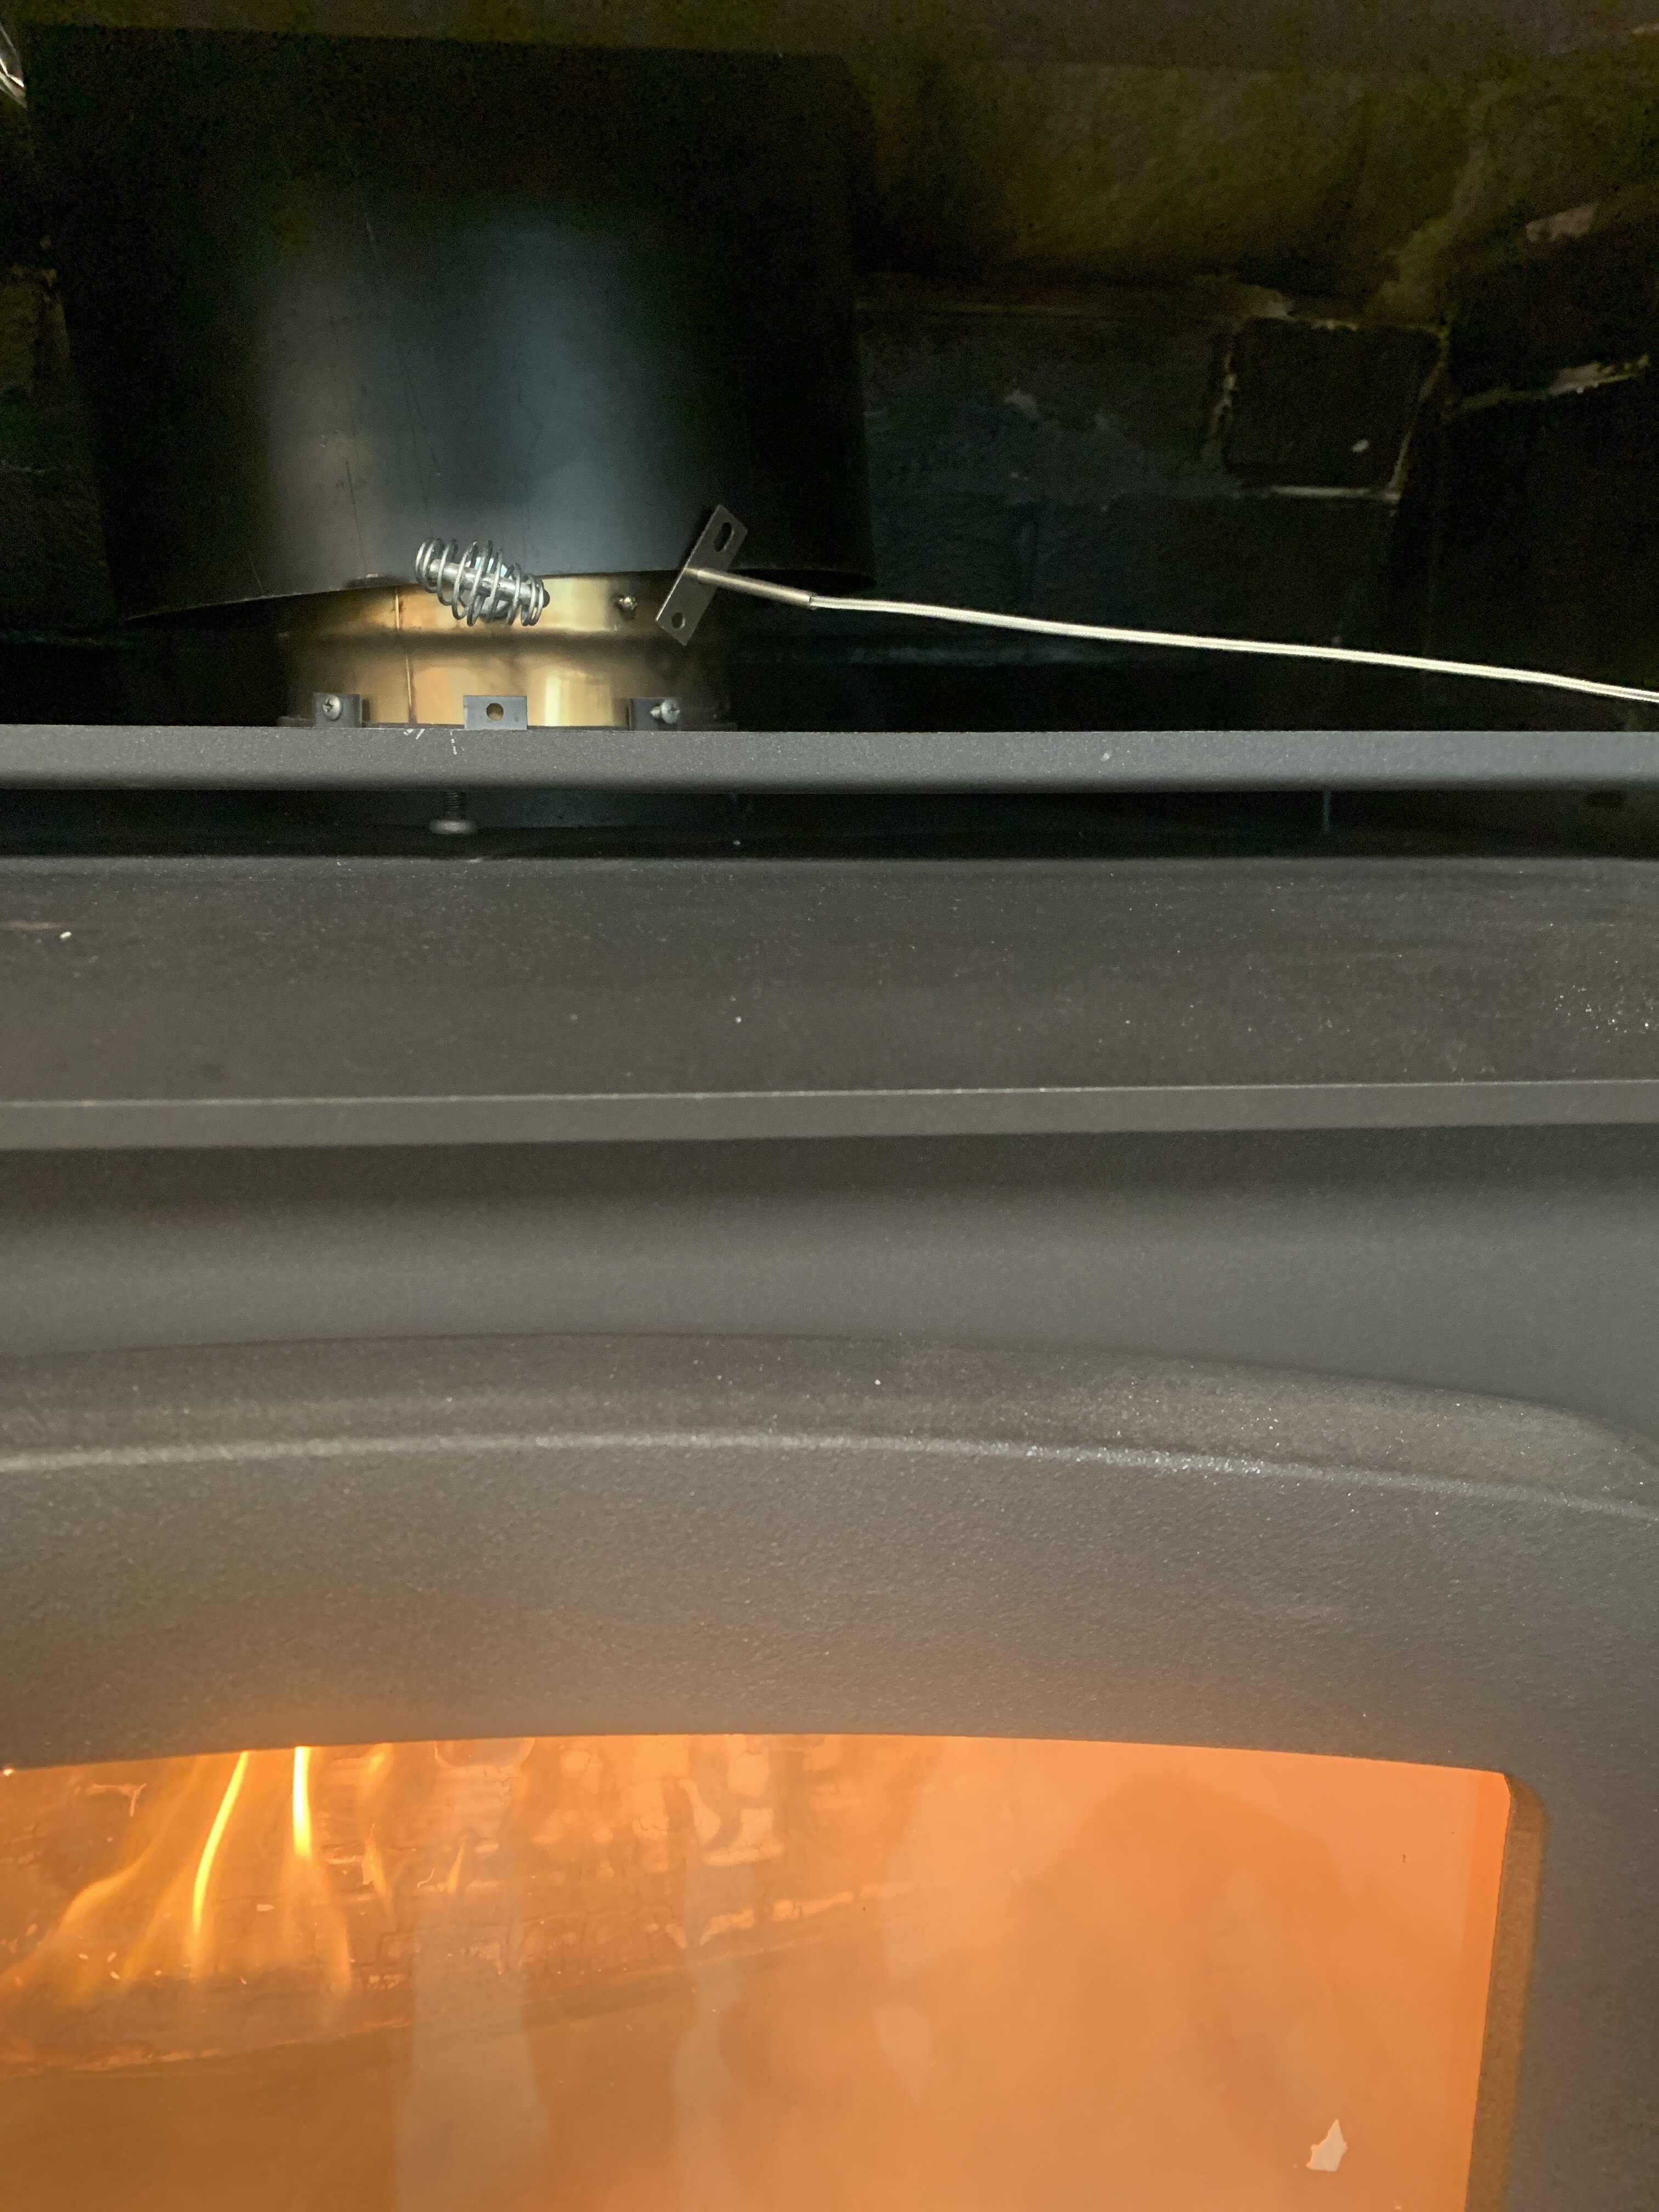 Converting a multi-fuel to woodburning